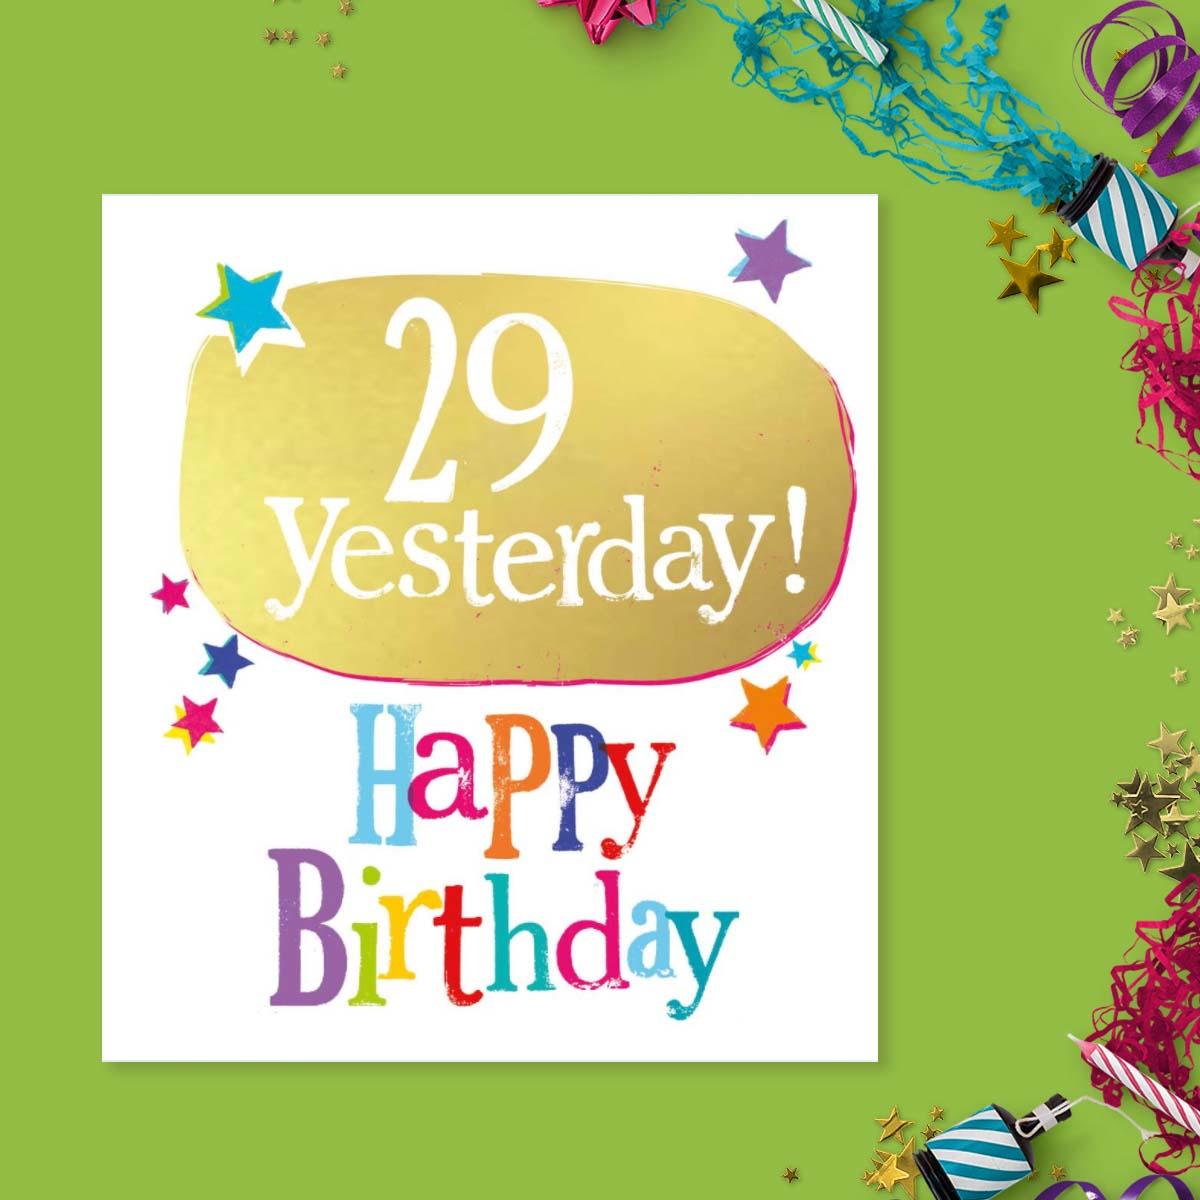 29 Yesterday ! Happy Birthday Card Front Image